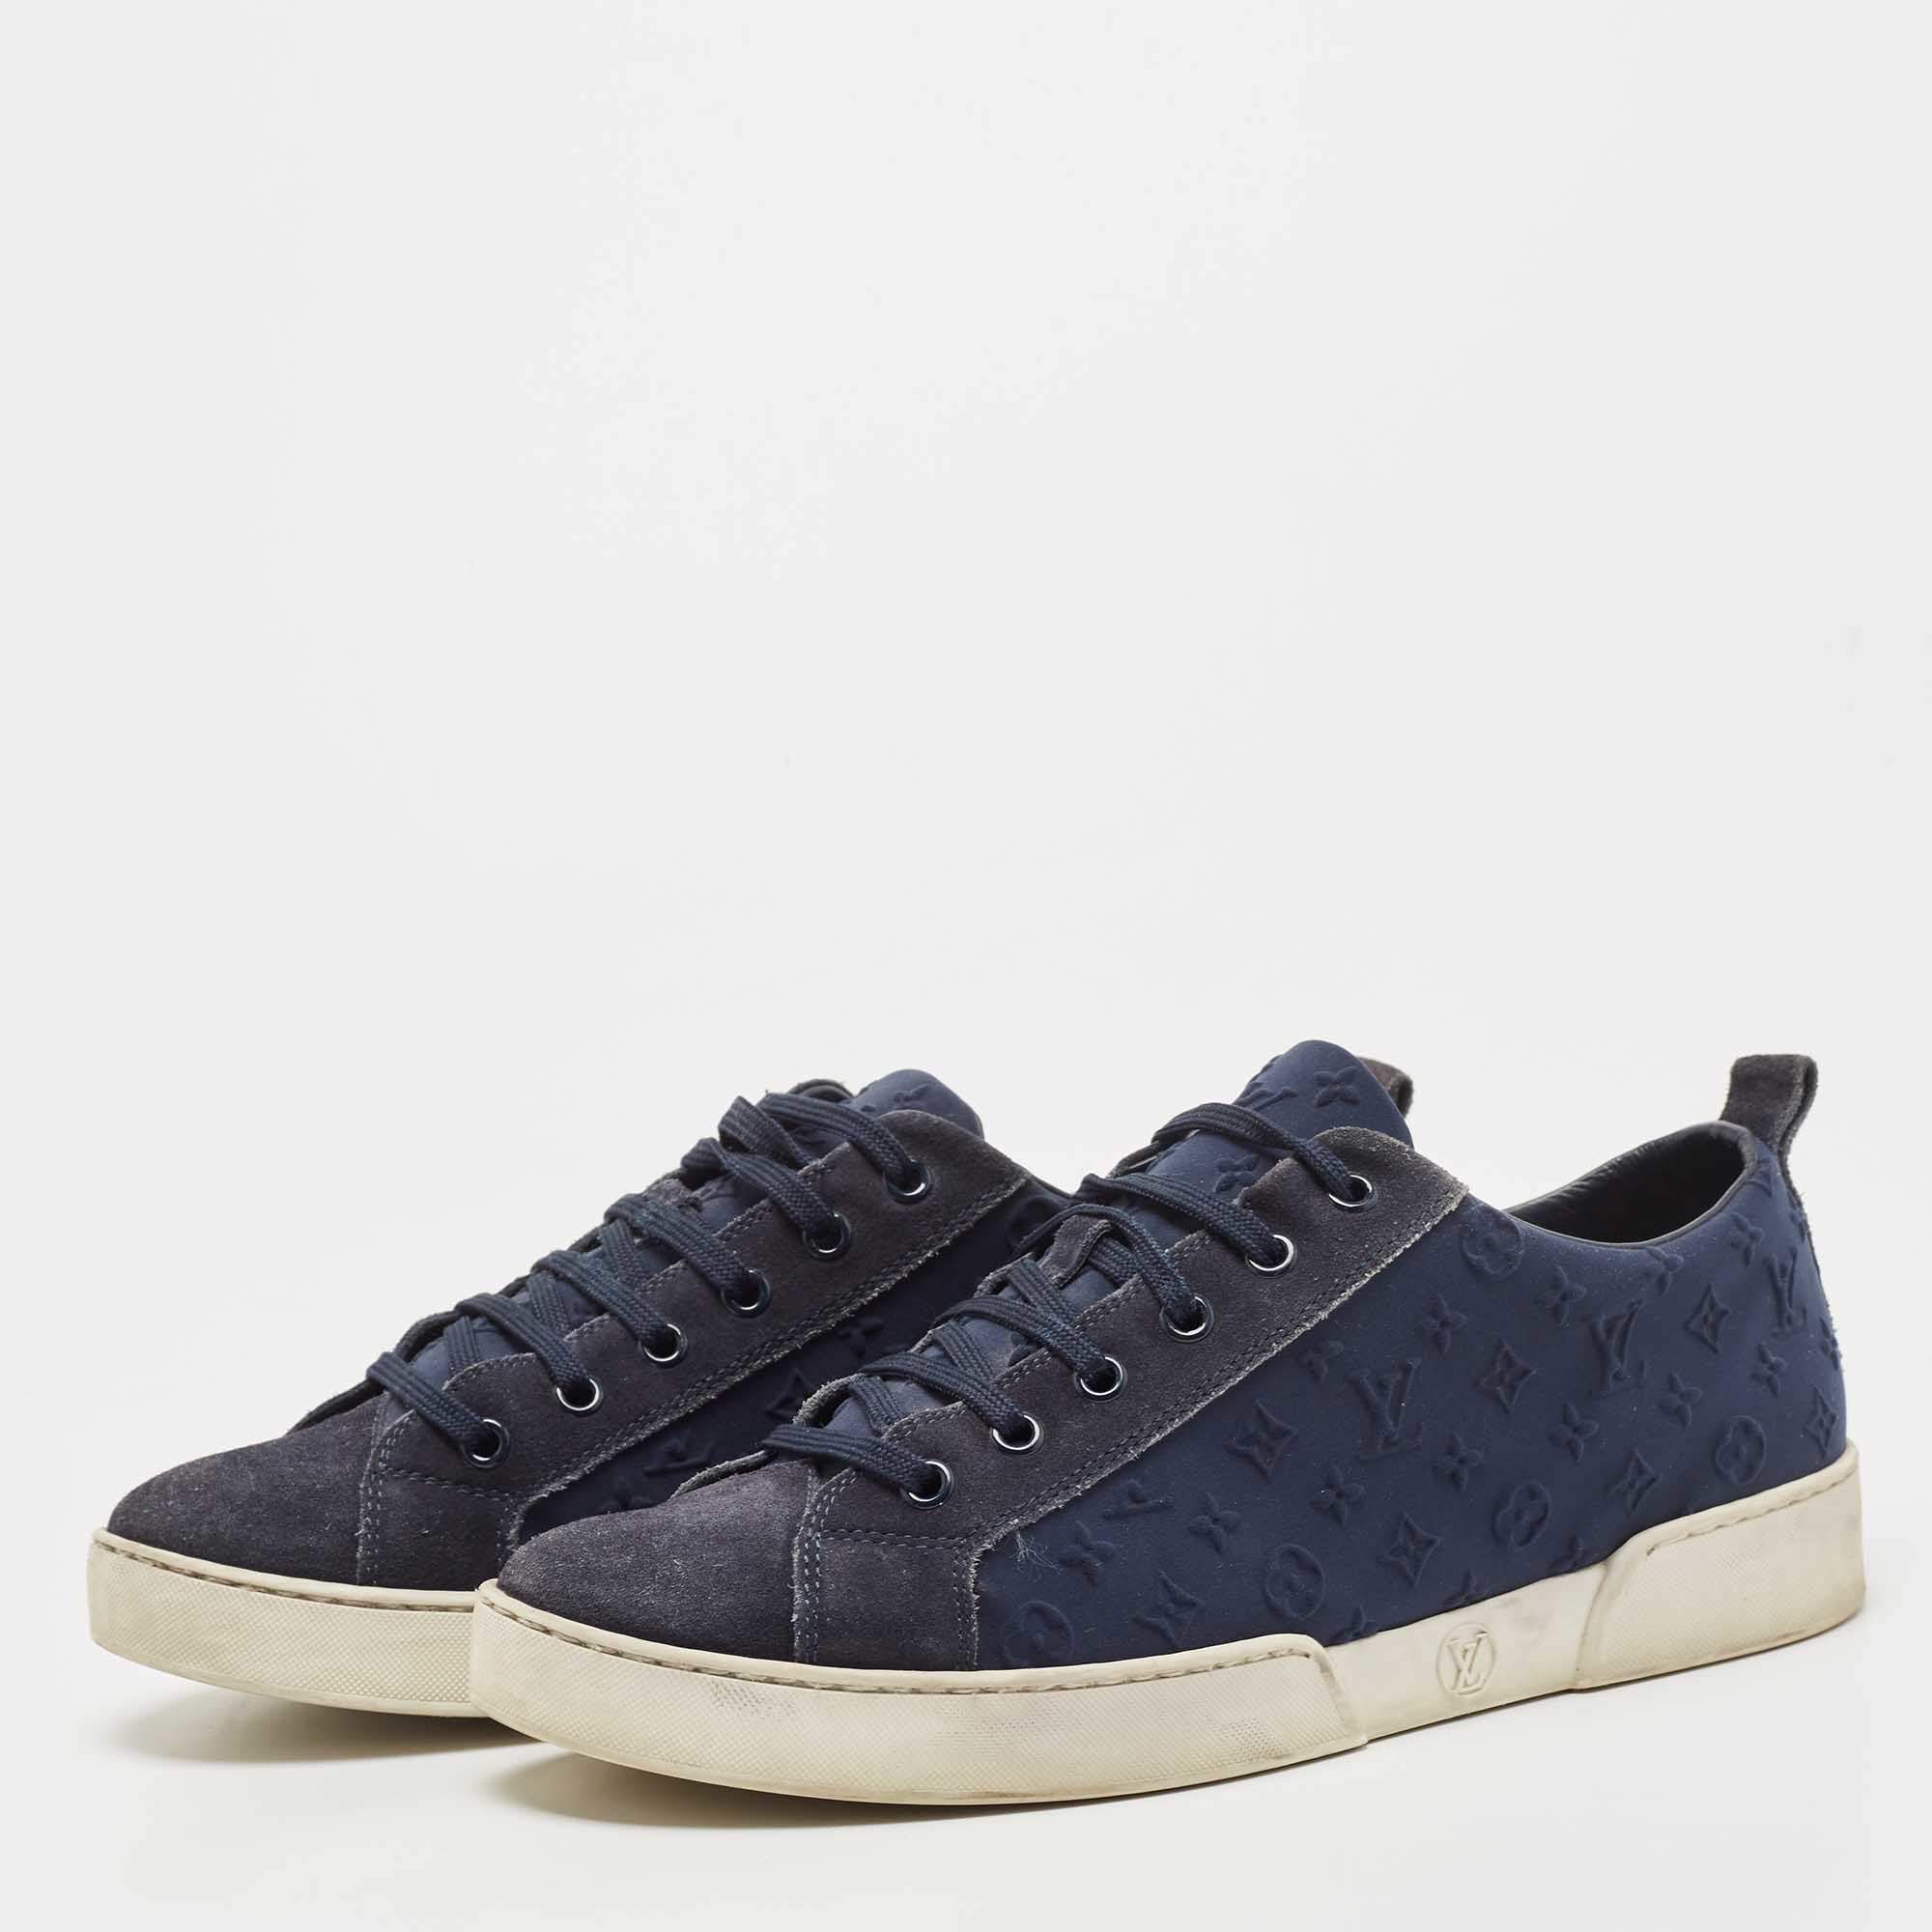 Louis Vuitton Dark Blue Suede And Monogram Fabric Low Top Sneakers Size 39  Louis Vuitton